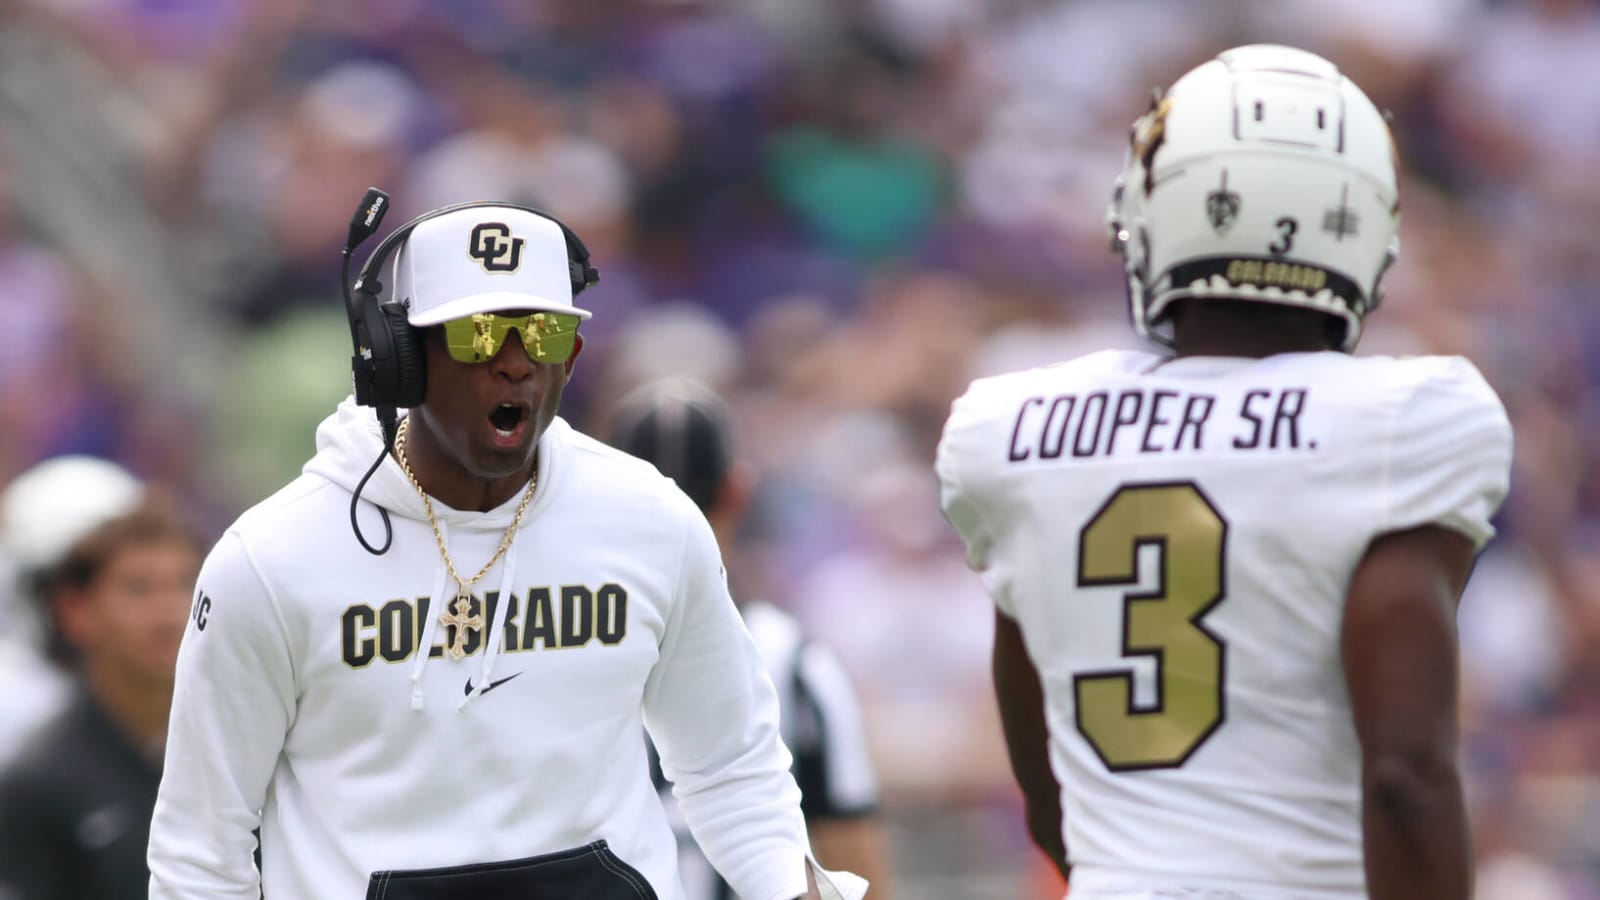 Hype surrounding Colorado and Coach Prime is about to erupt